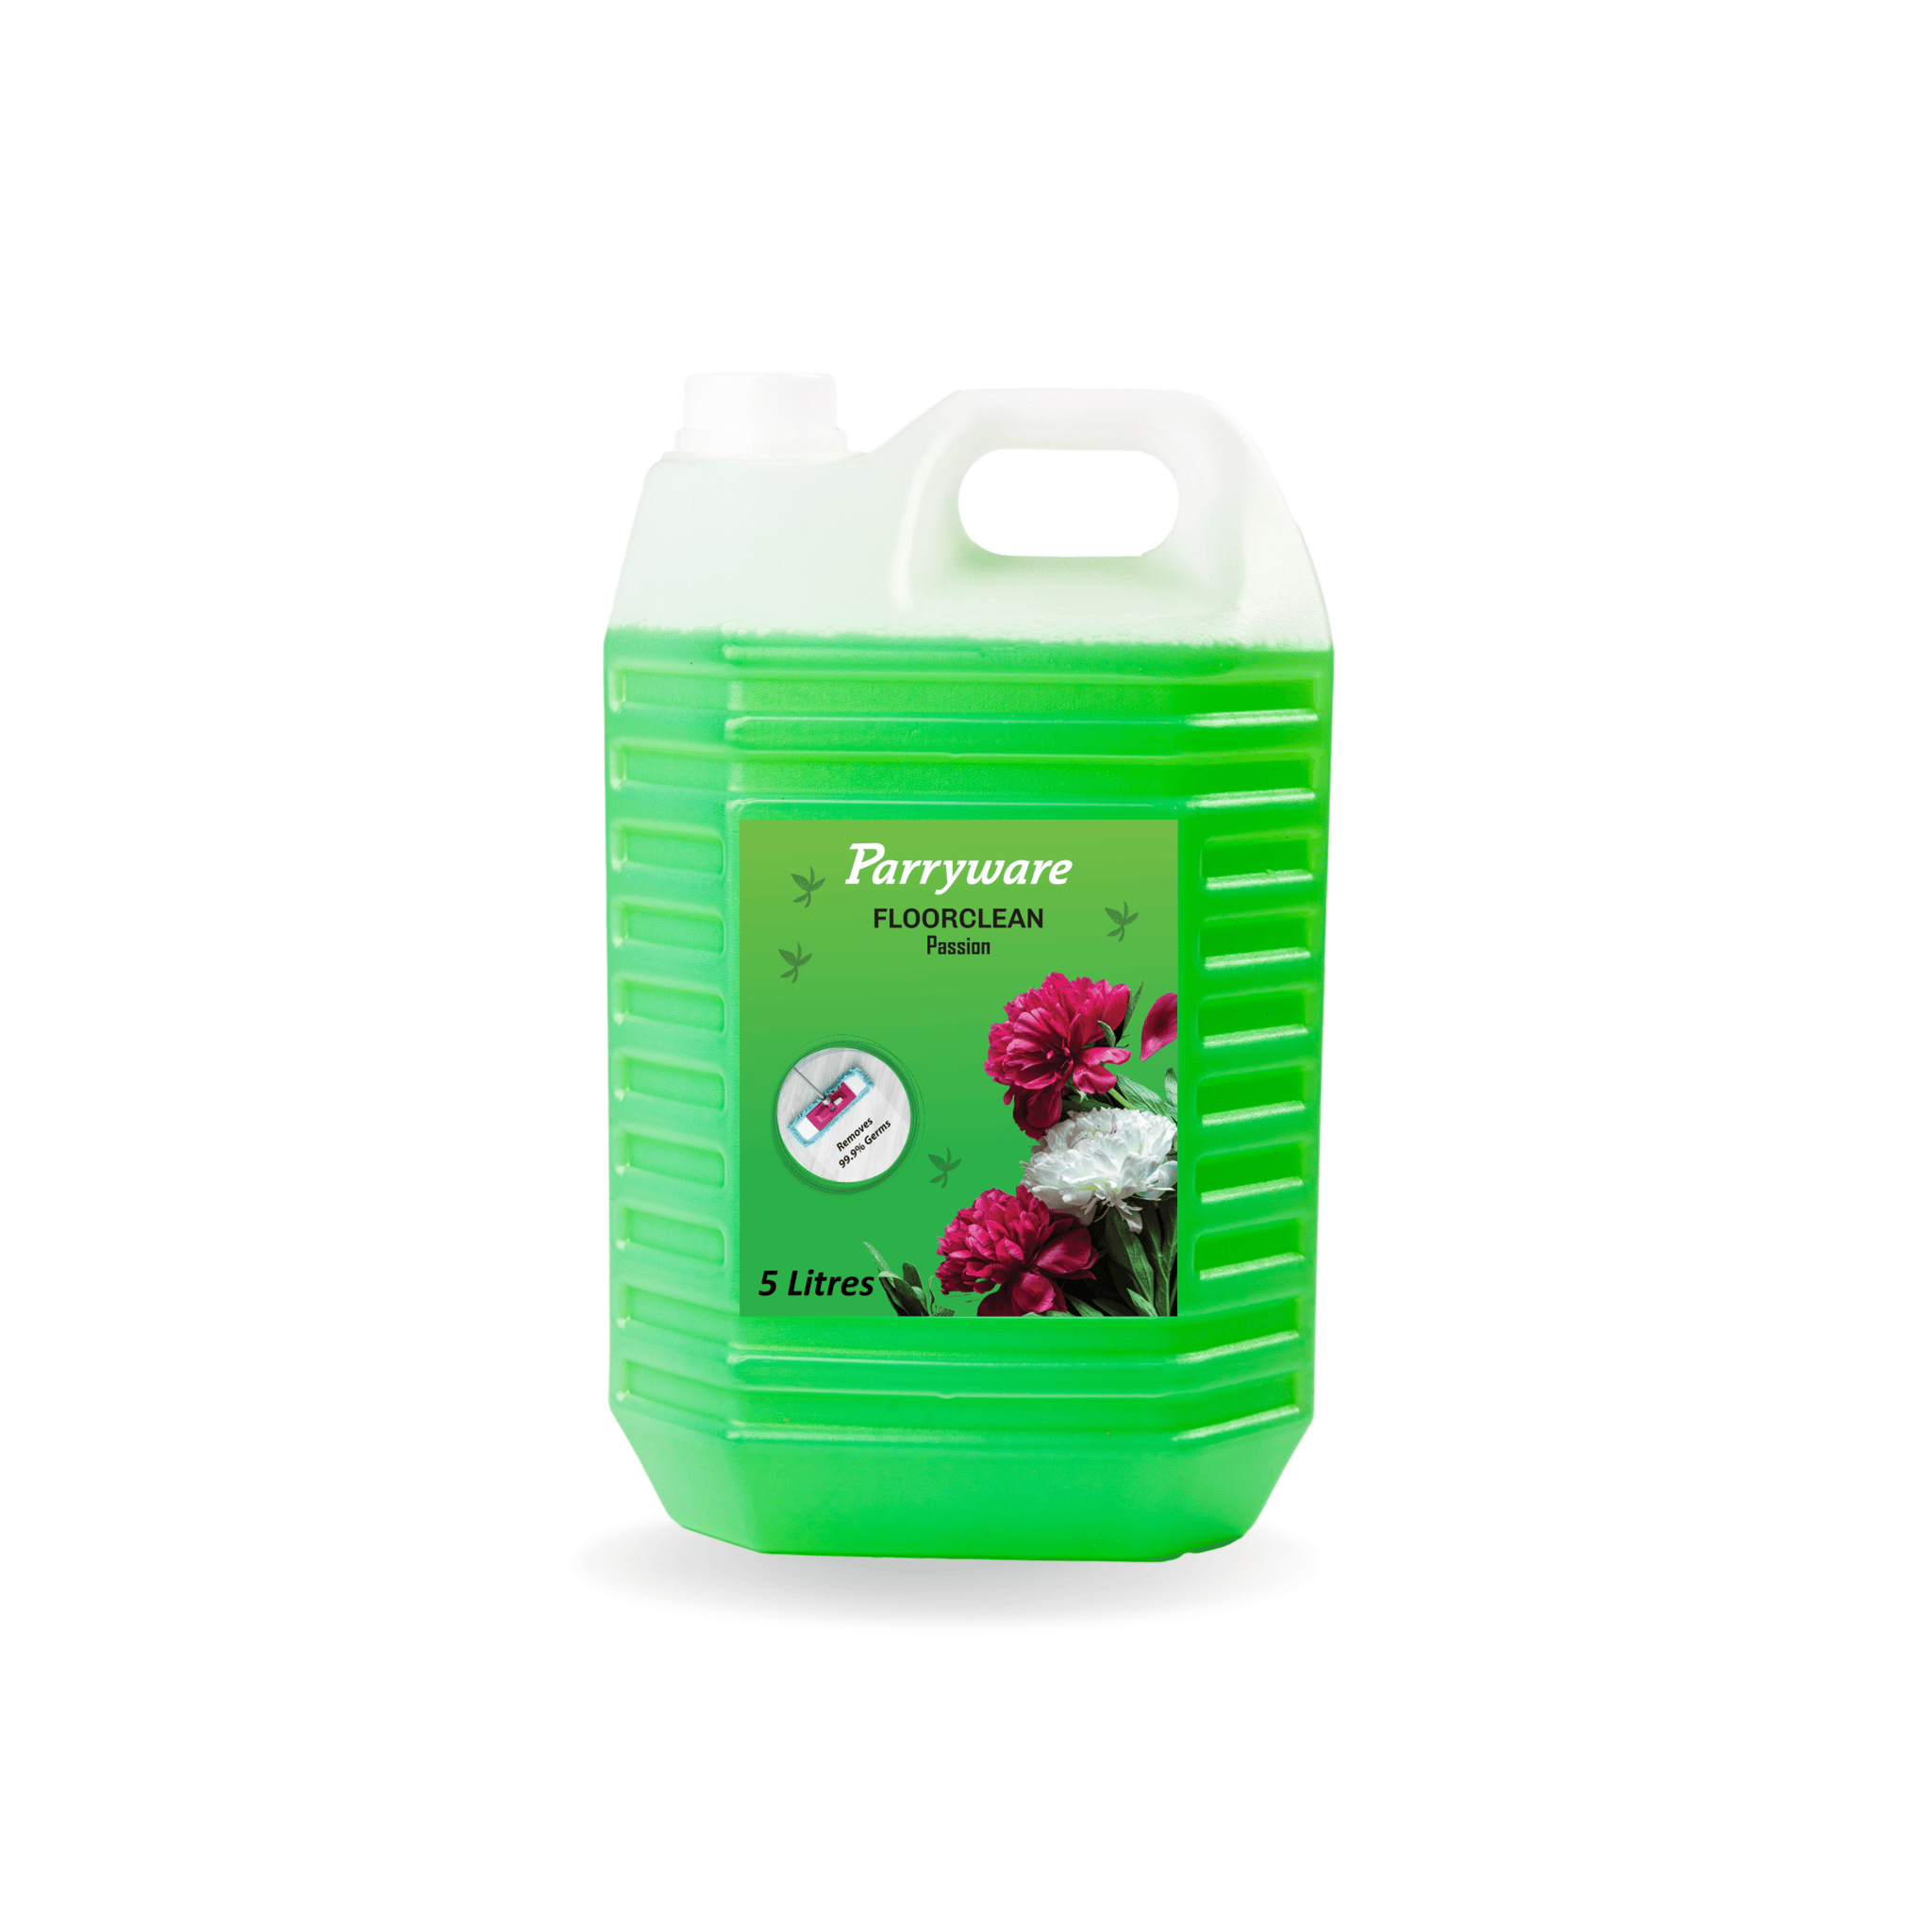 Parryware Floorclean Disinfectant Floor Cleaner 5L Pack | 99.9% Germ Protection and Disinfection - Passion